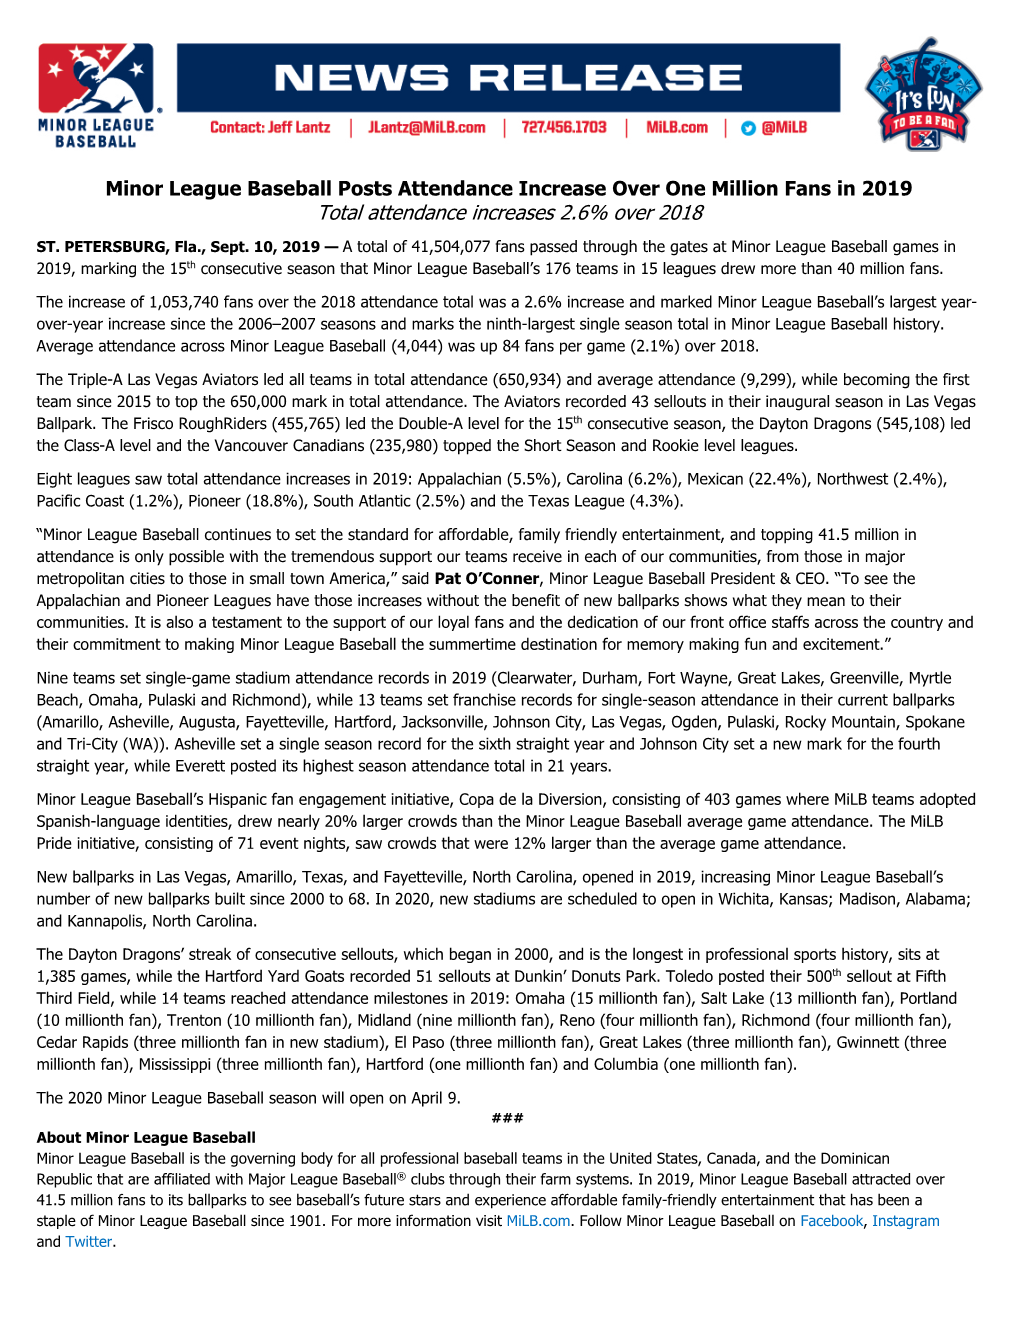 Minor League Baseball Posts Attendance Increase Over One Million Fans in 2019 Total Attendance Increases 2.6% Over 2018